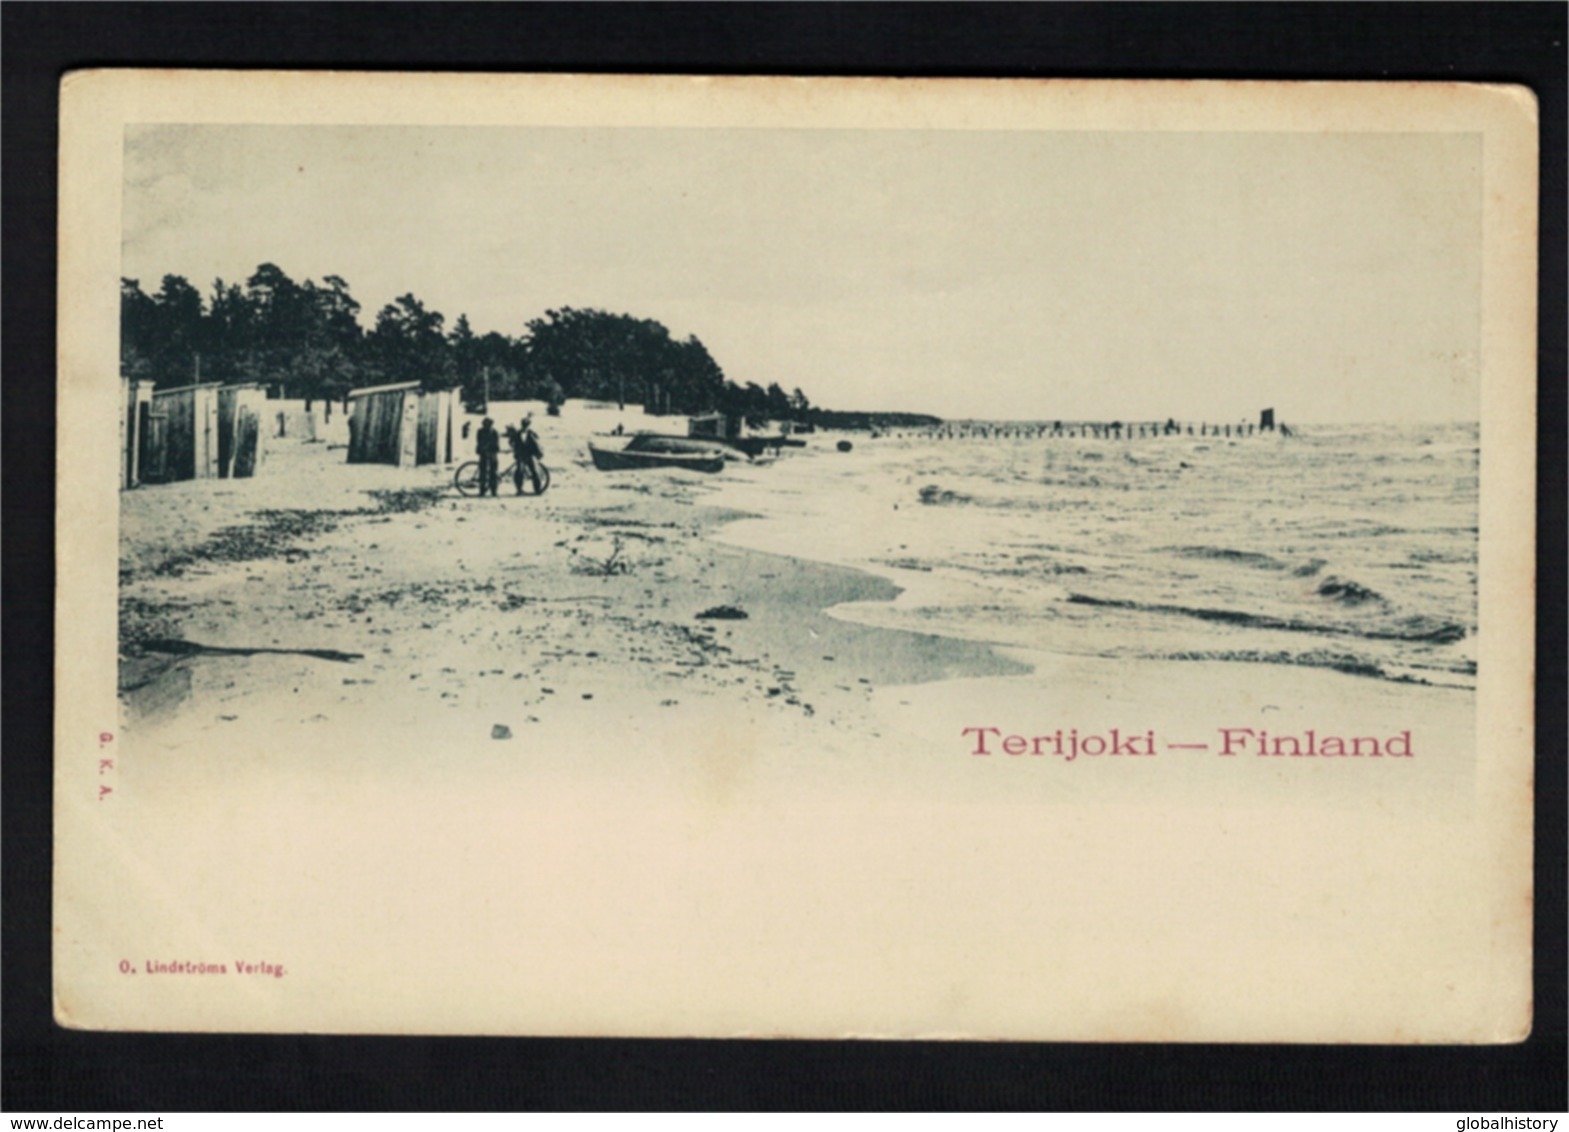 DE1248 - FINLAND - TERIJOKI - VIEW ON THE BEACH AND WOODEN CABINS - Finland